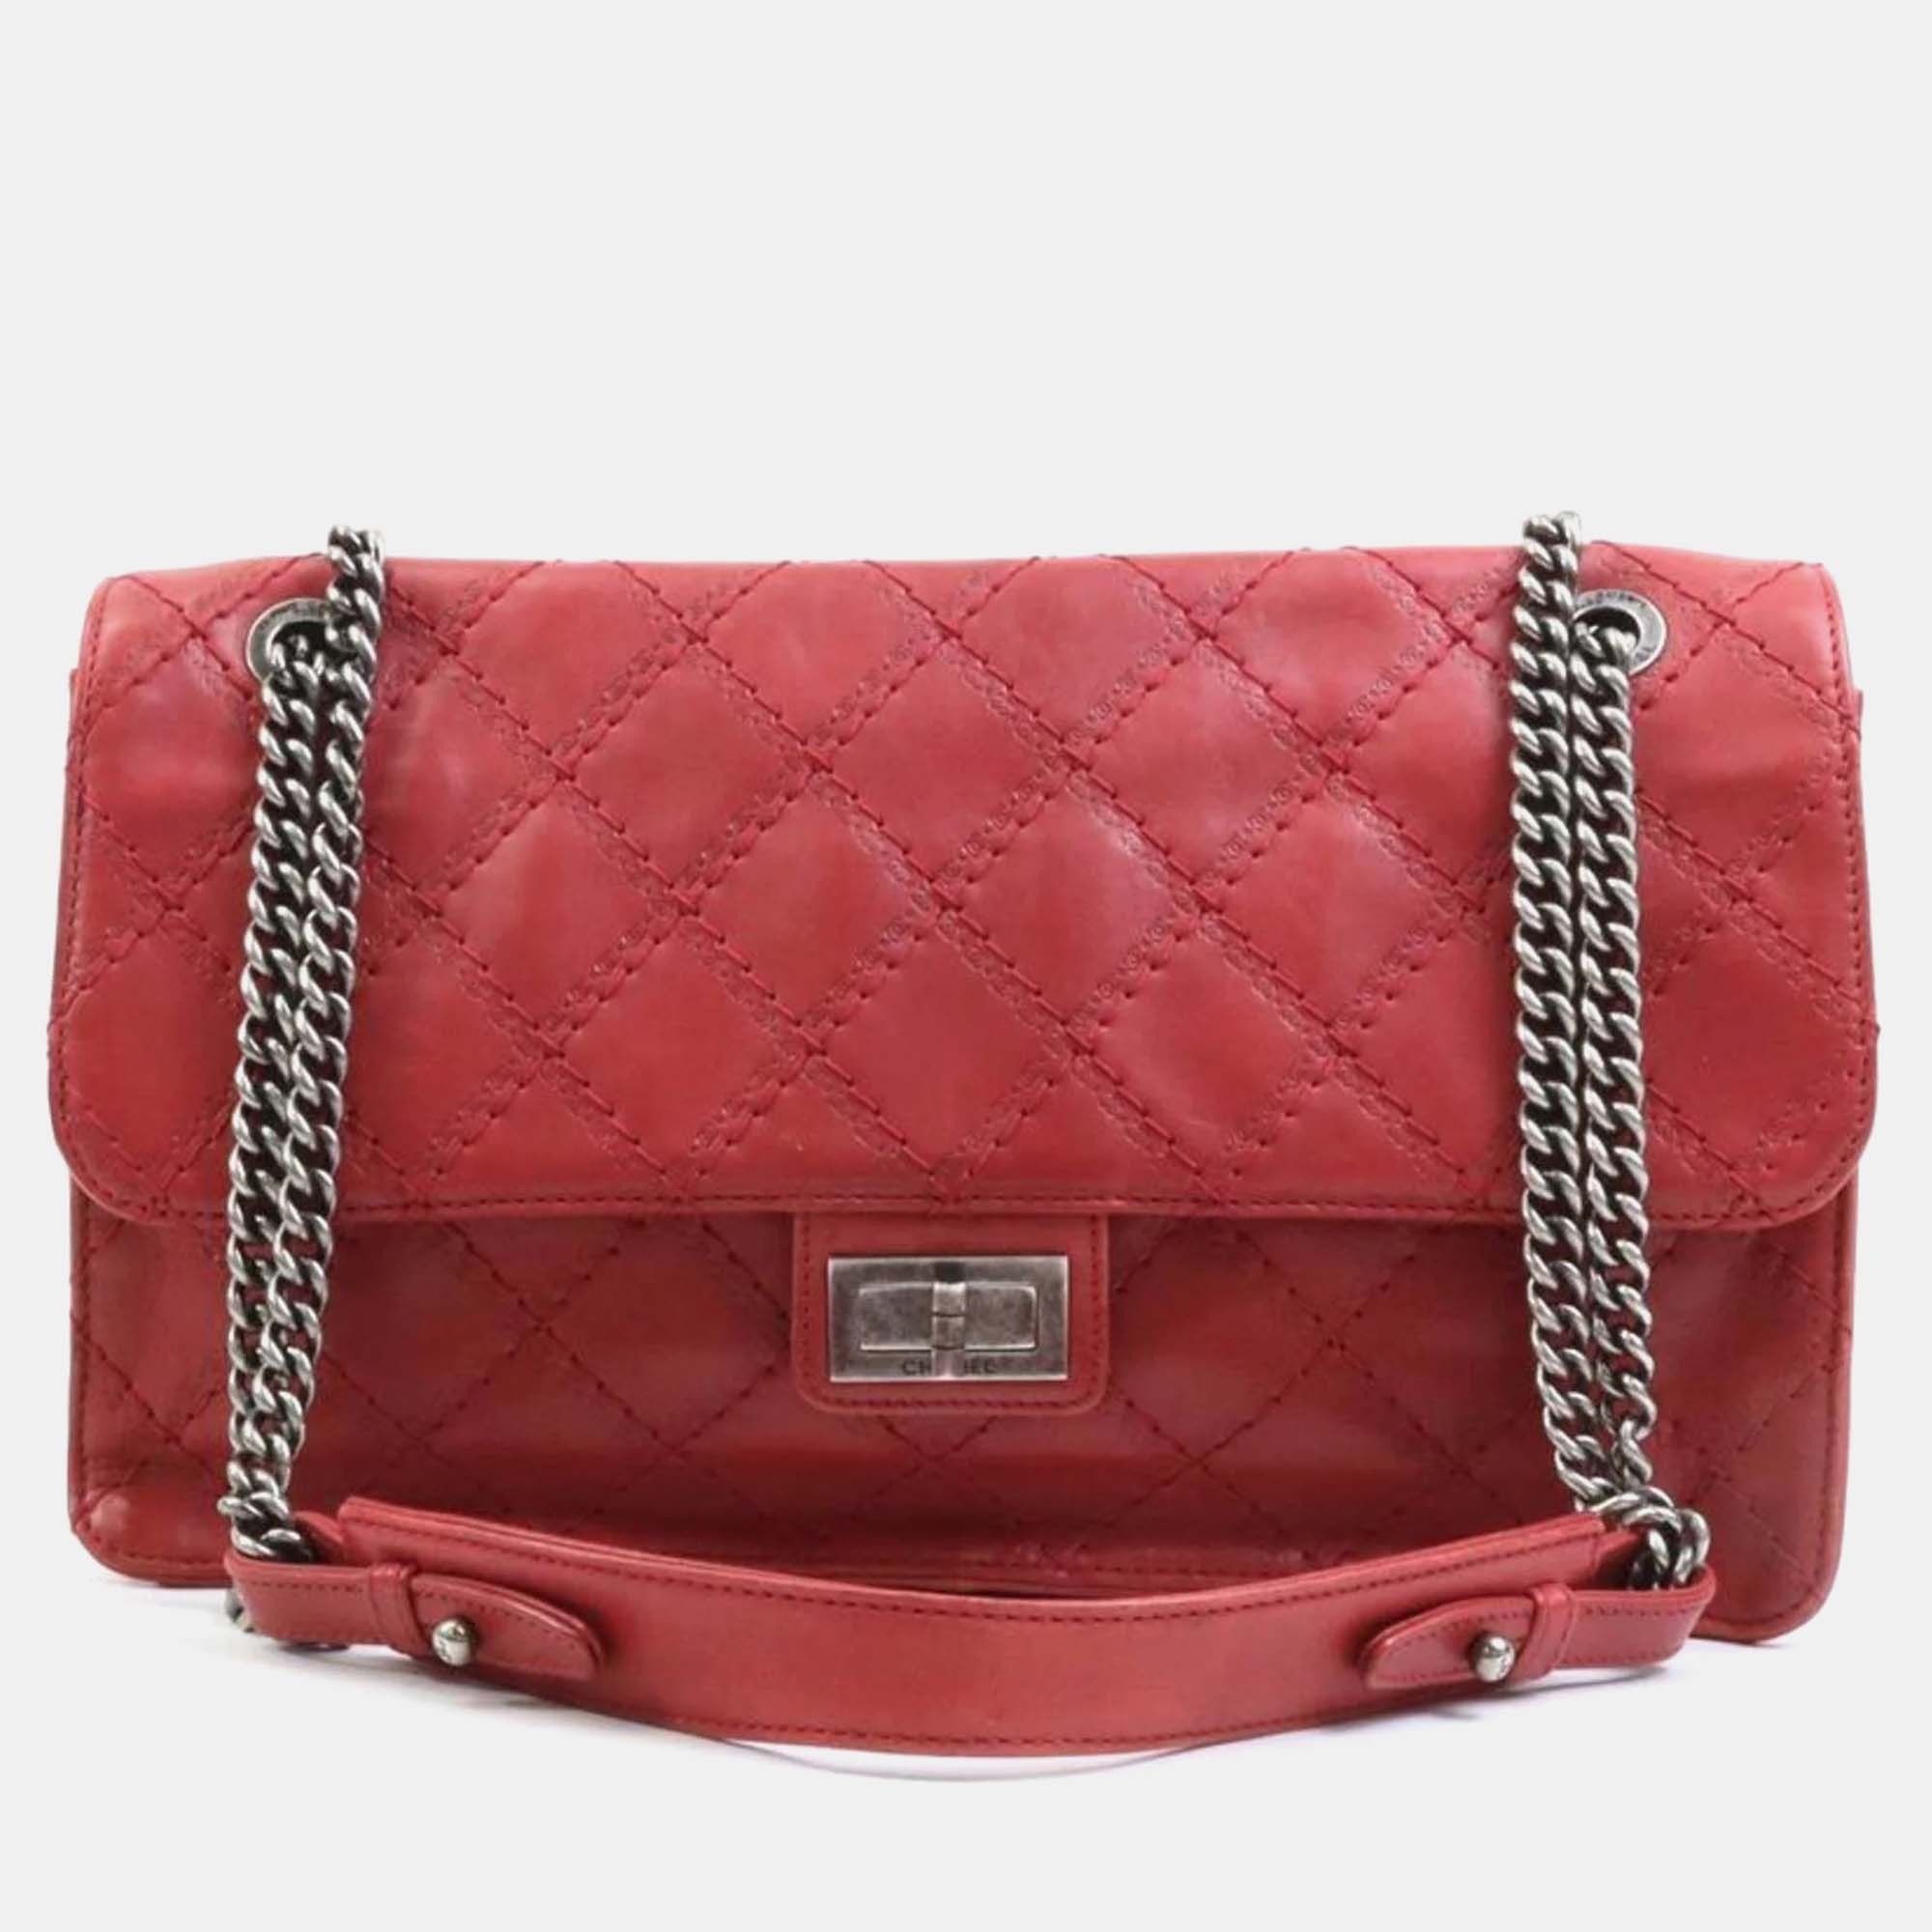 Chanel red leather cc crave flap bag